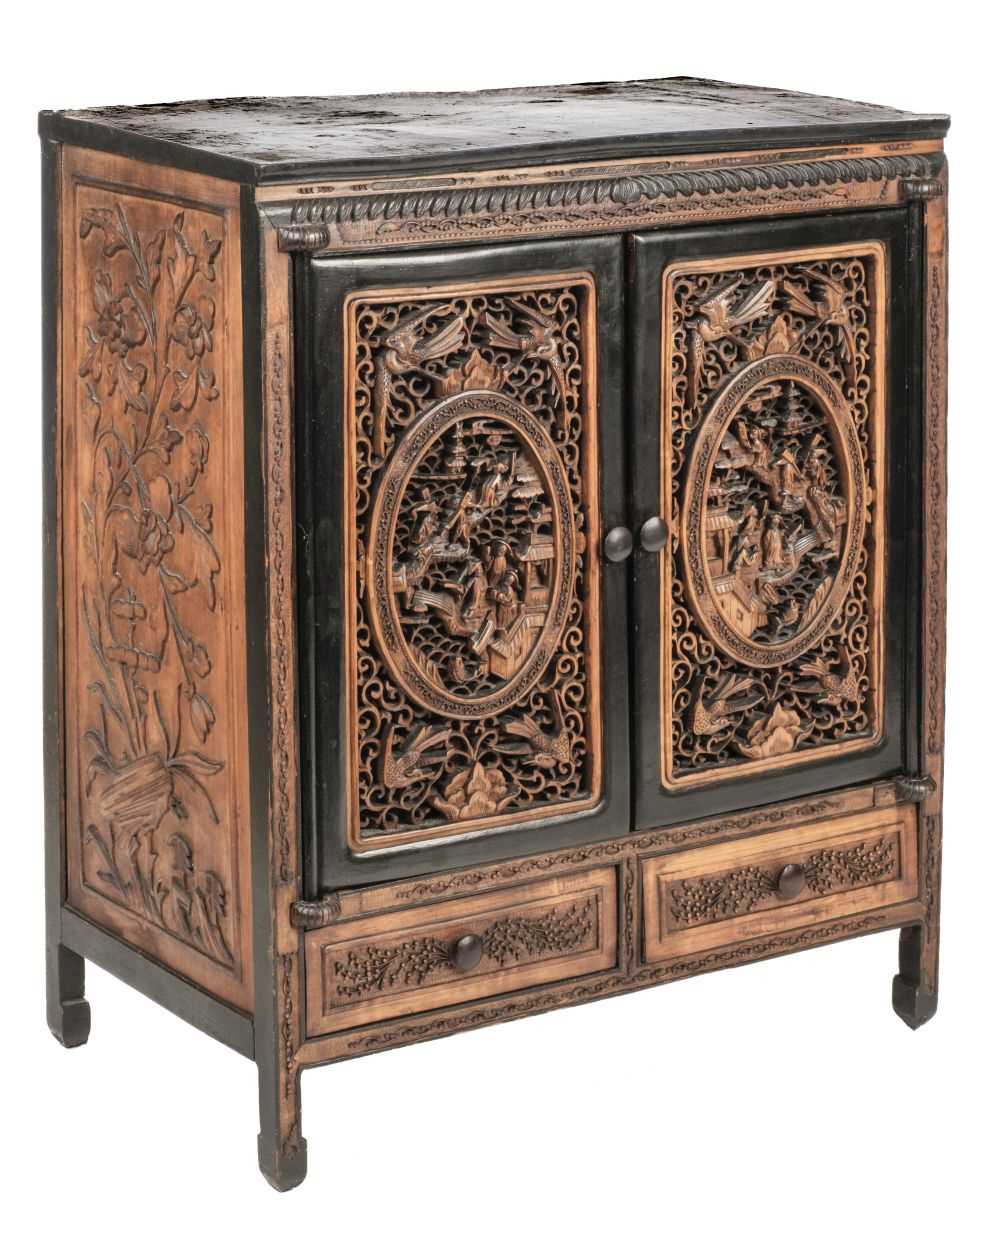 Lot 448 - Table Cabinet. An early 20th century Chinese wooden table cabinet